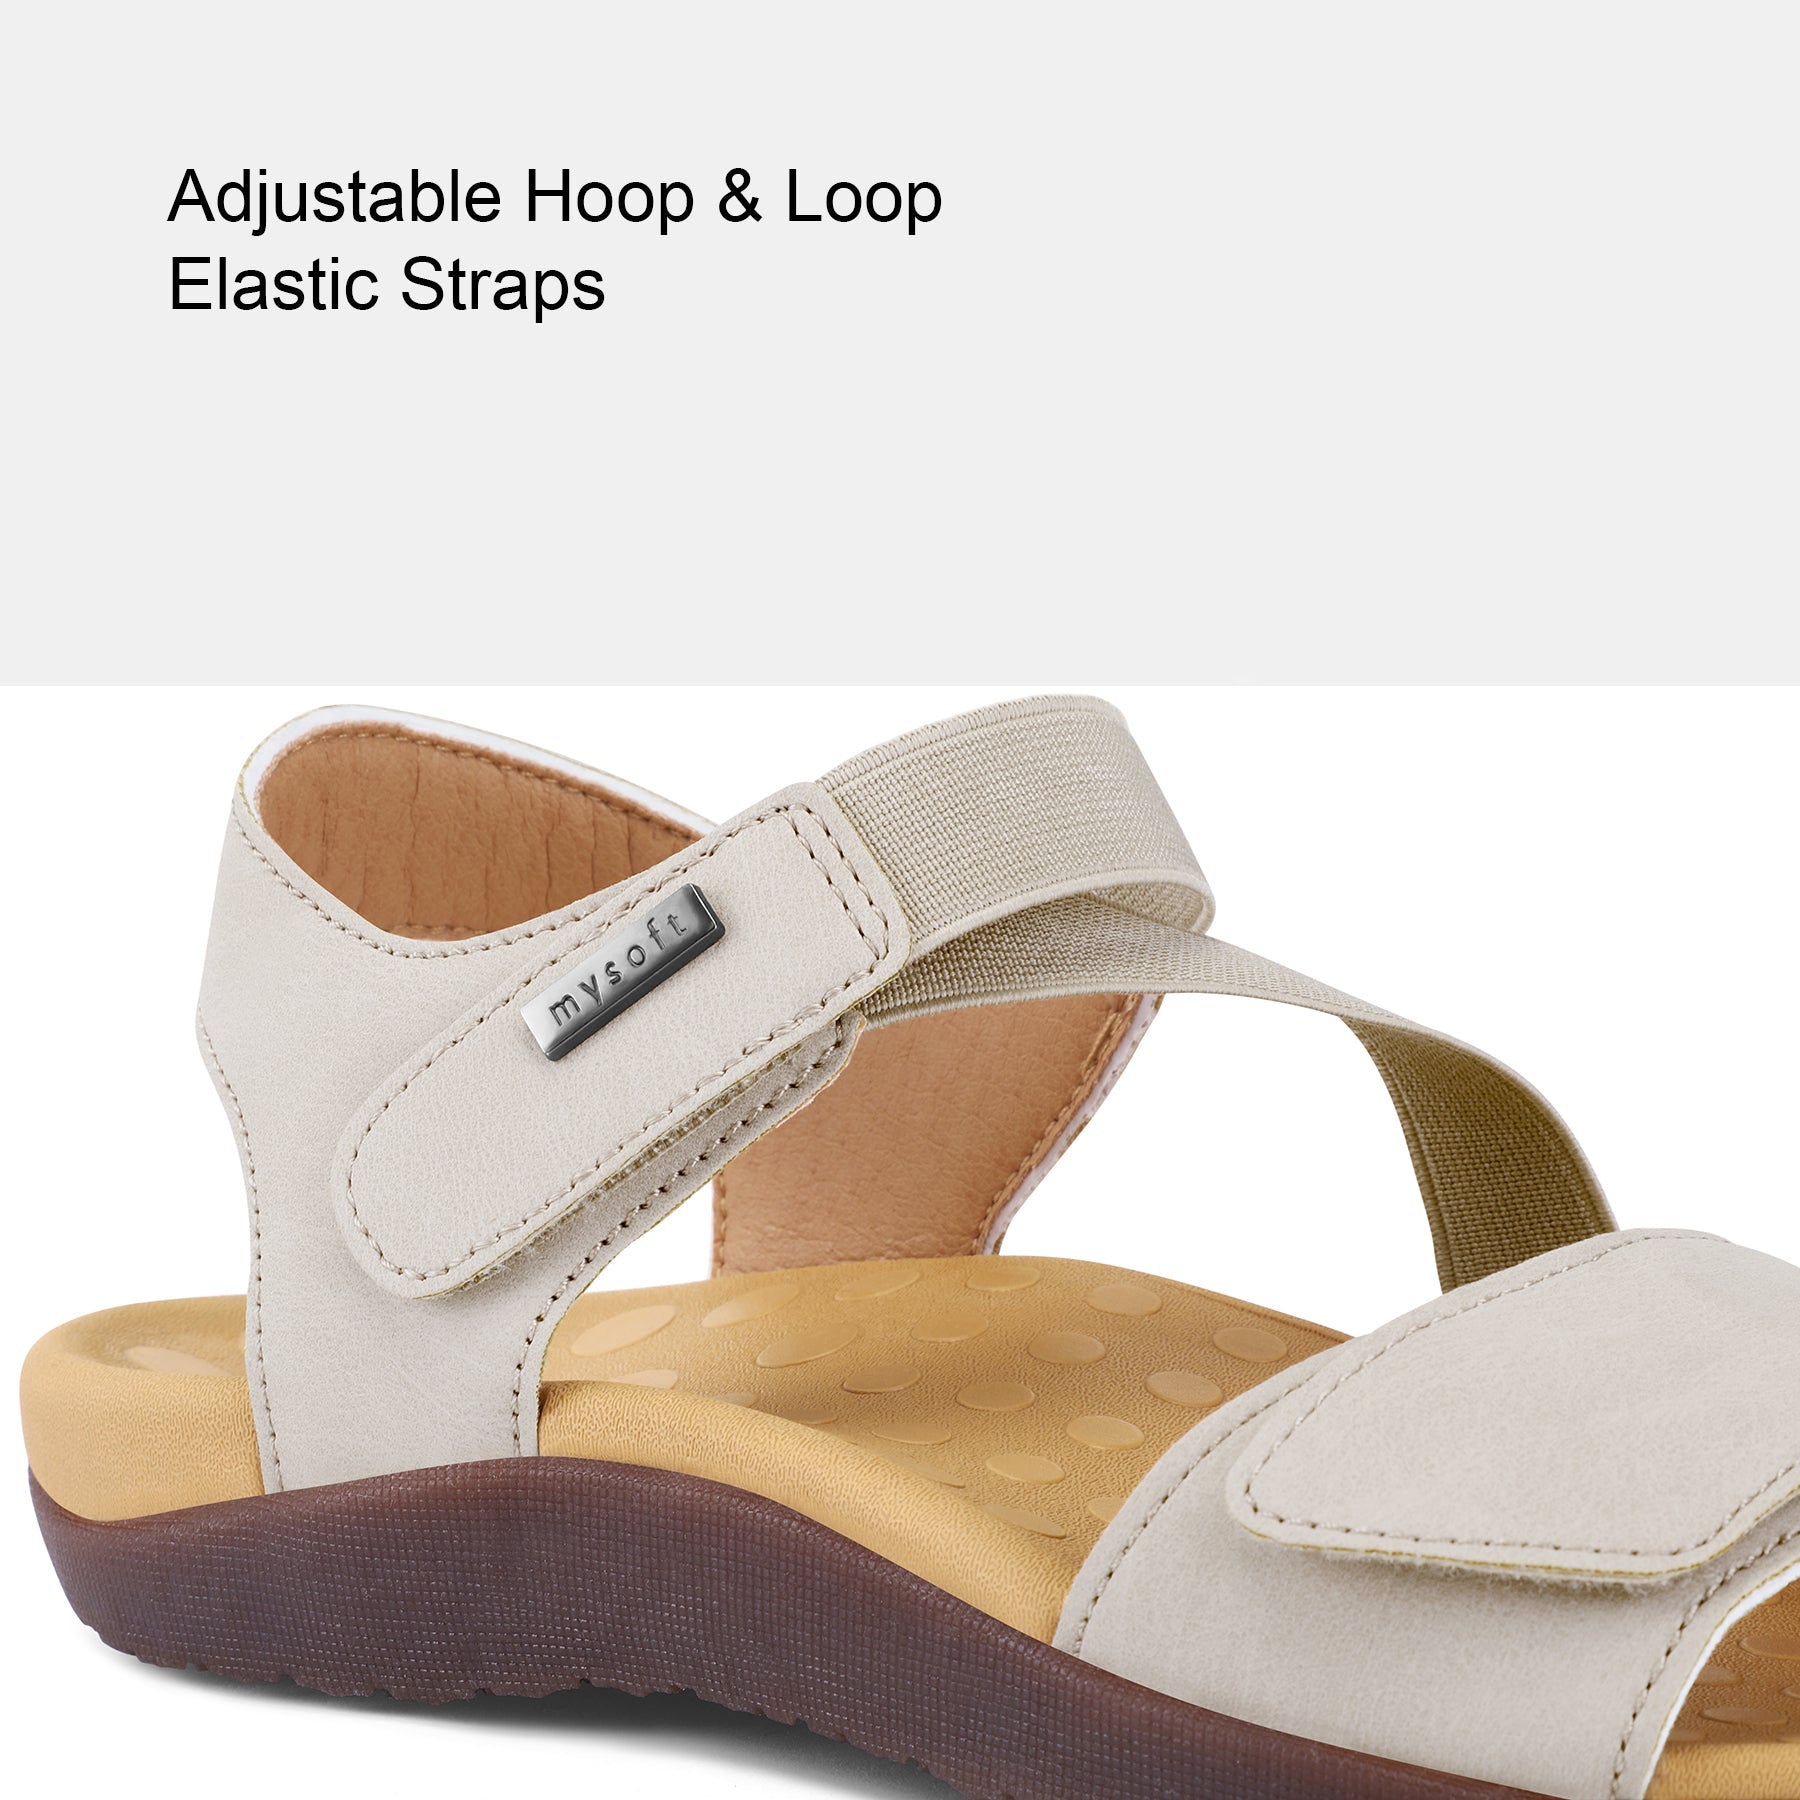 These arch support sandals are on sale at Amazon